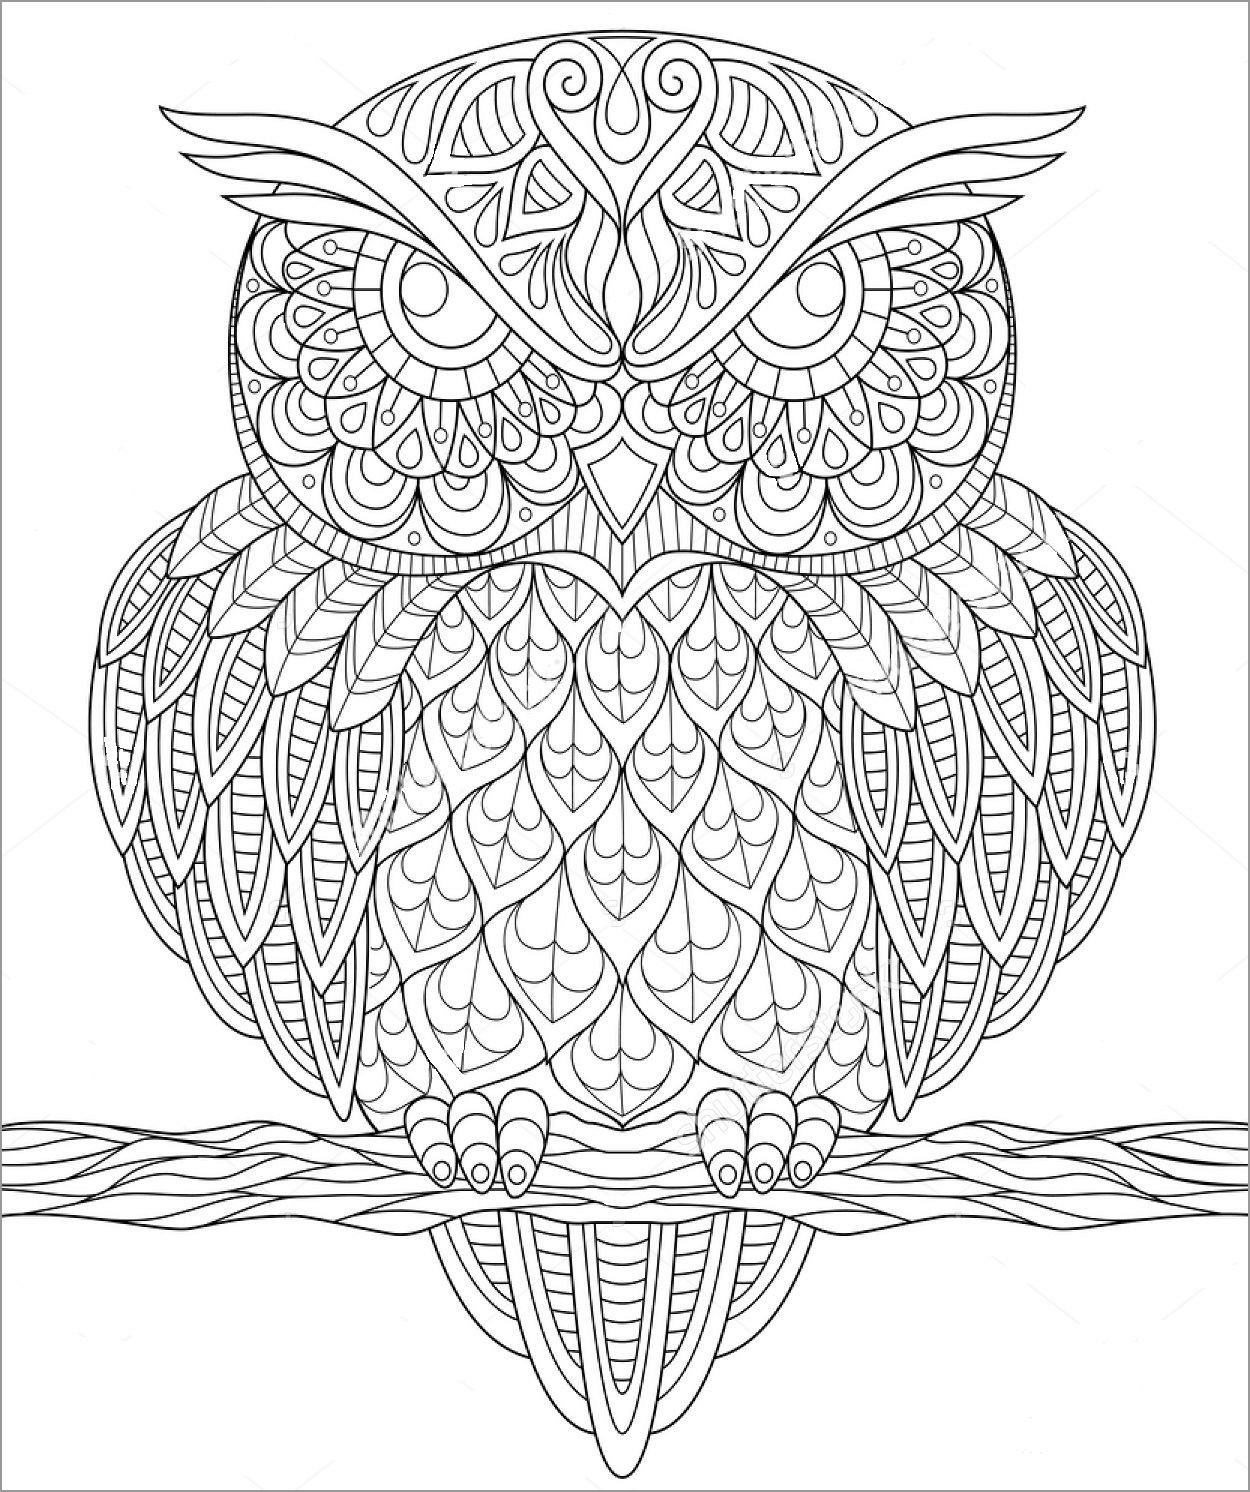 Owl Zentangle Coloring Page